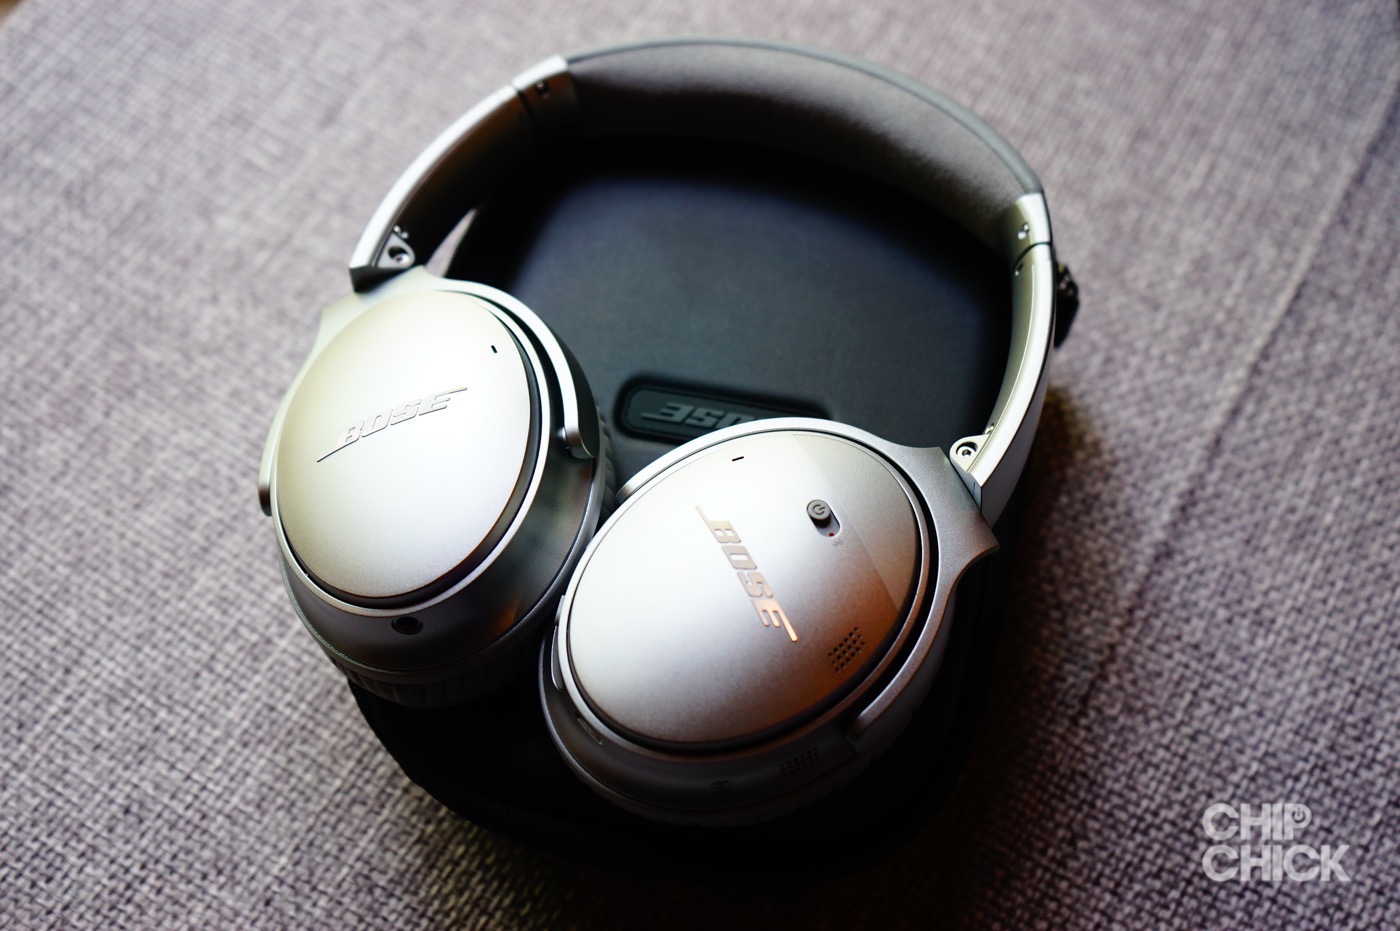 Bose S Best Selling Noise Cancelling Headphones Are Finally Wireless